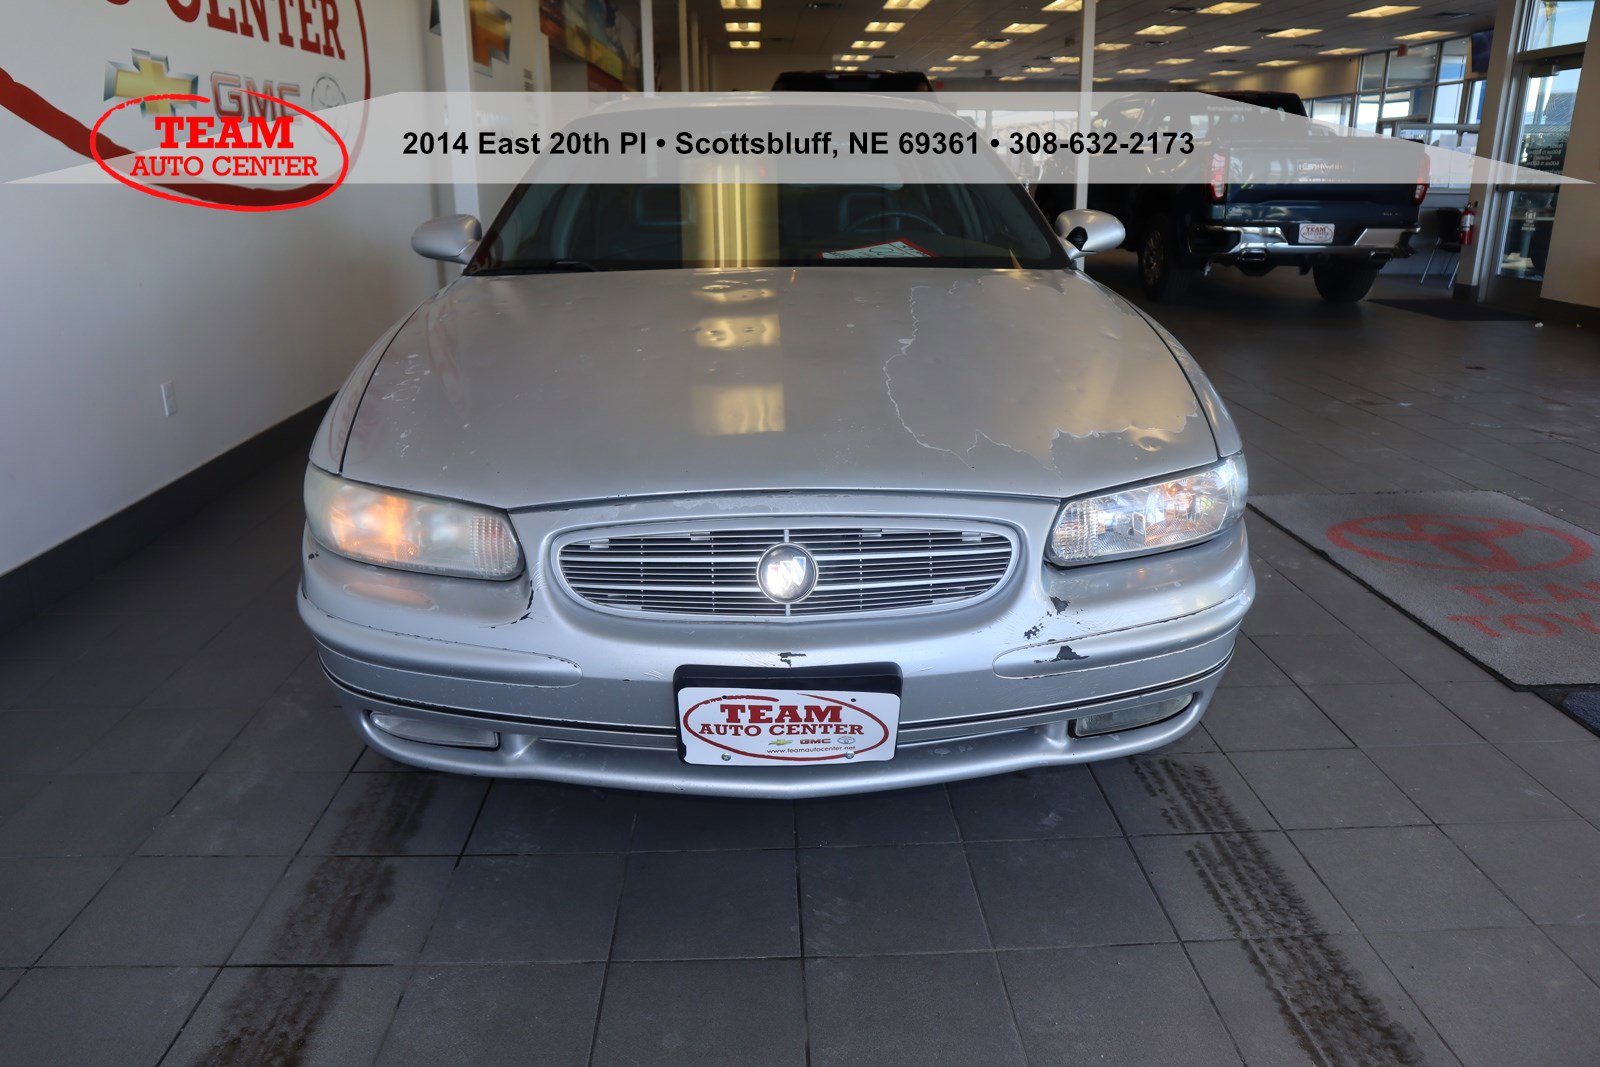 Used 2004 Buick Regal LS with VIN 2G4WB52K141202772 for sale in Scottsbluff, NE